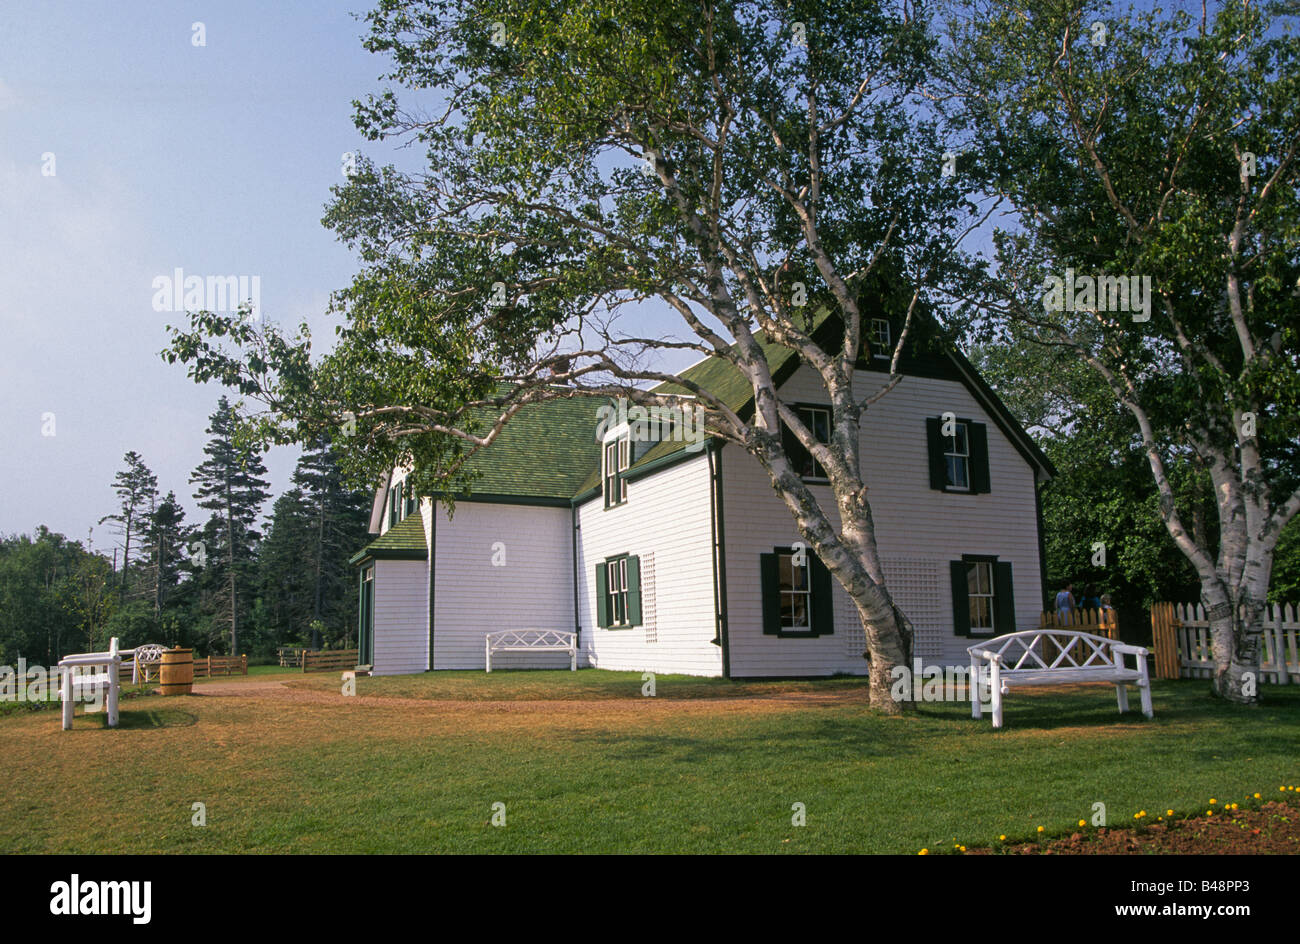 A view of the House At Green GAbles home of Anne Shirley of Anne Of Green Gables novels in Cavendish, Prince Edward Island Canada. Stock Photo